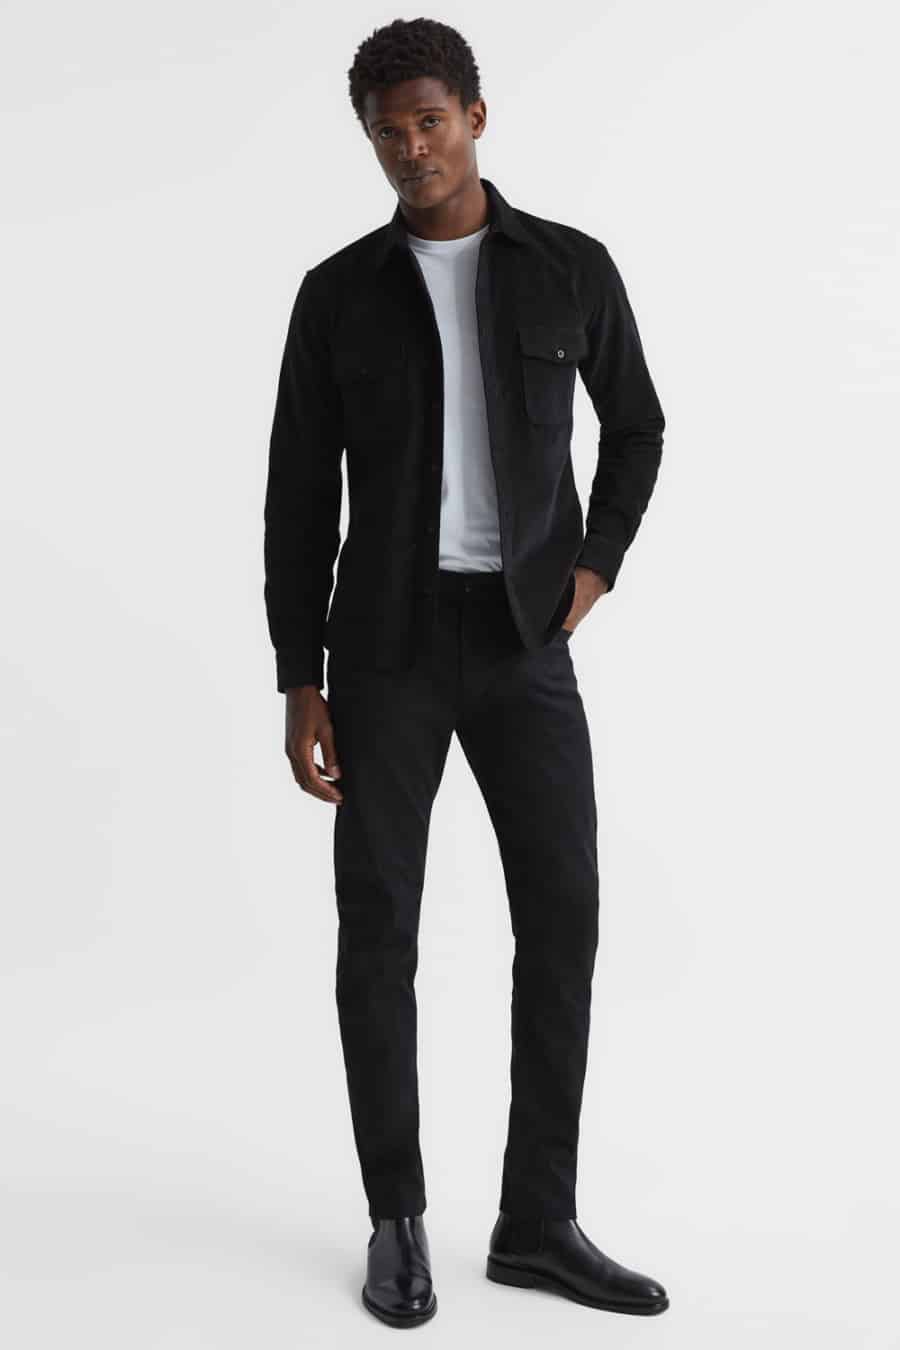 Outfits For Men: 1000s Of Effortlessly Cool, Easy-To-Wear Looks